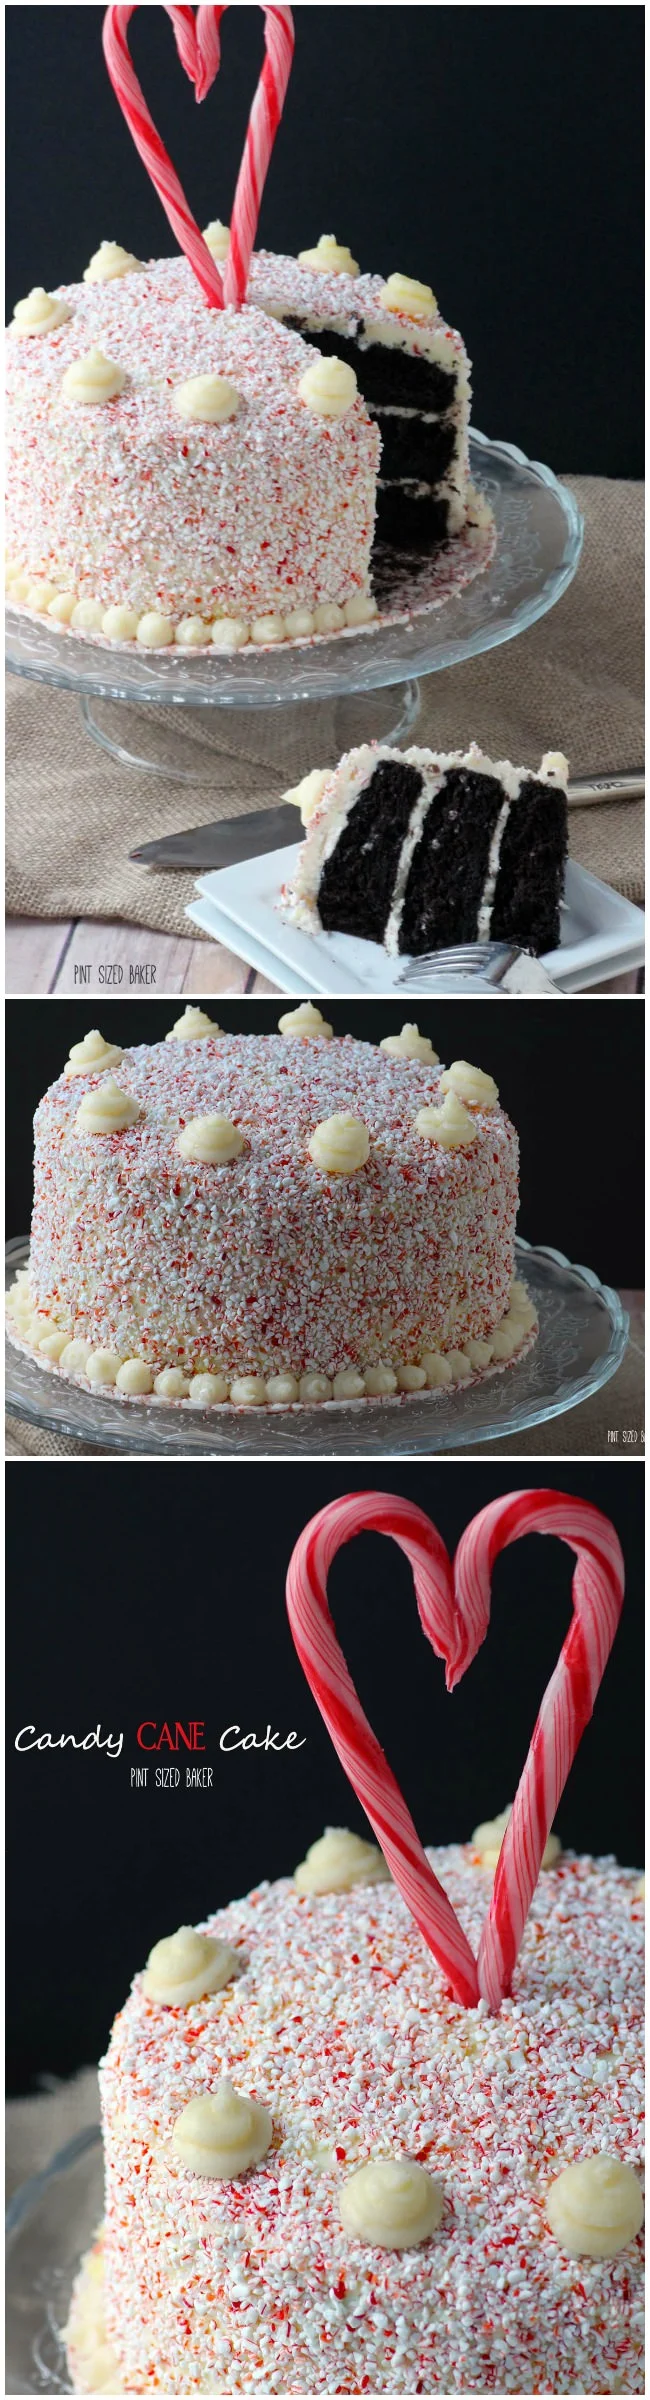 Dark Chocolate Cake with a Candy Cane coating. This Candy Cane Cake is perfect for a Christmas party!